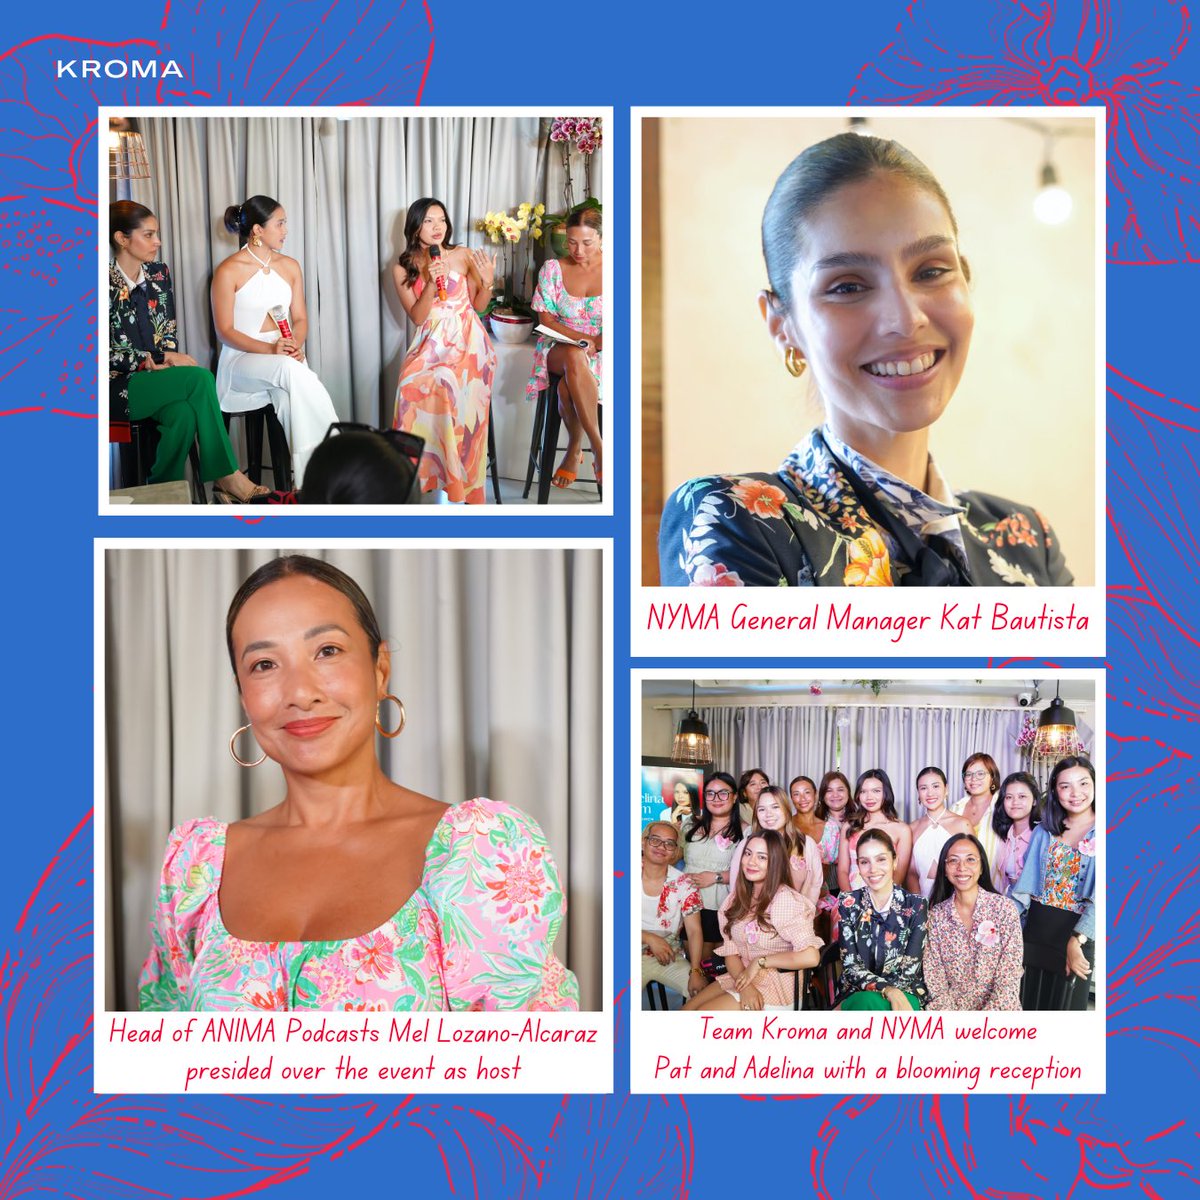 .@NYMA_MGMT warmly welcomes Pat Tingjuy and Adelina Eugenio to their growing family of talents 🌺🌸 Held at Flossom Kitchen + Cafe, the intimate gathering celebrated the unique journeys and bright futures of these remarkable women. Pat Tingjuy, a licensed architect and athlete,